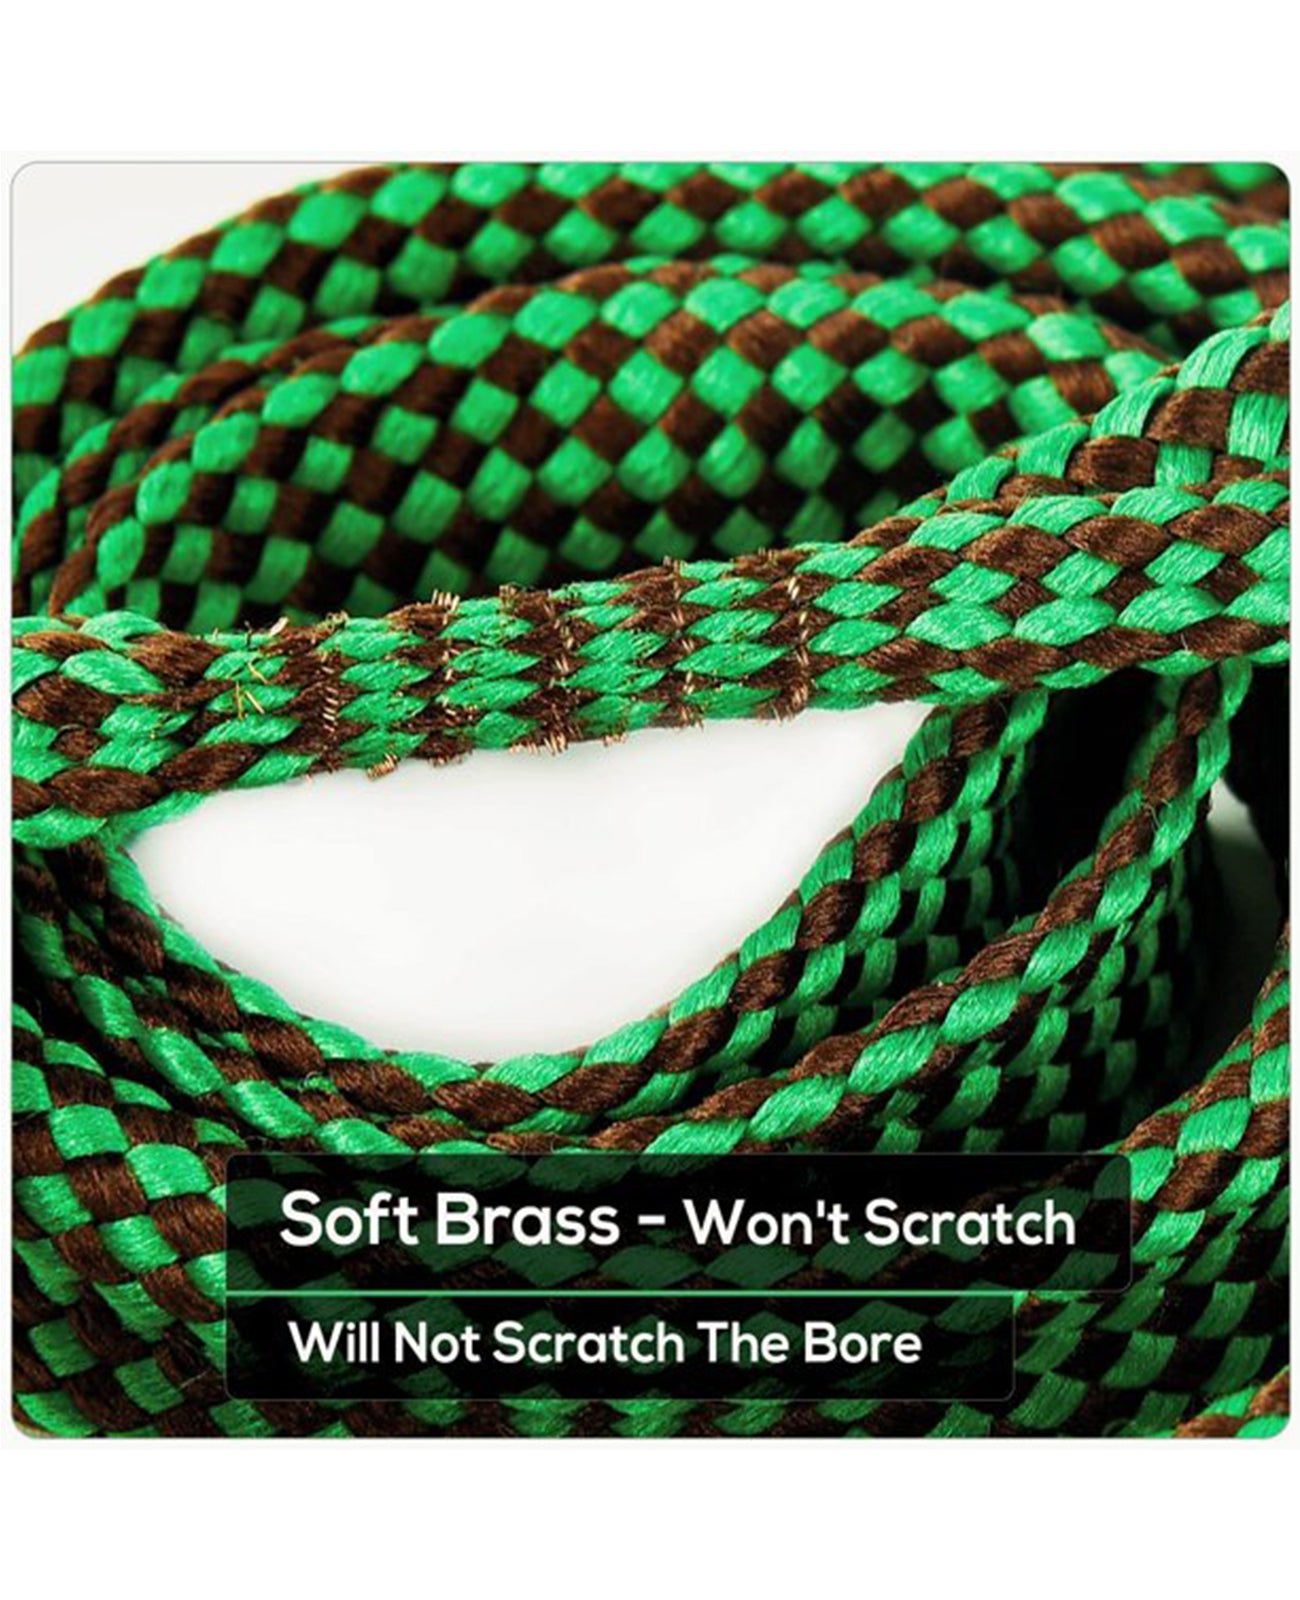 Bore Cleaner with Soft Brass and Won't Scratch the Barrel